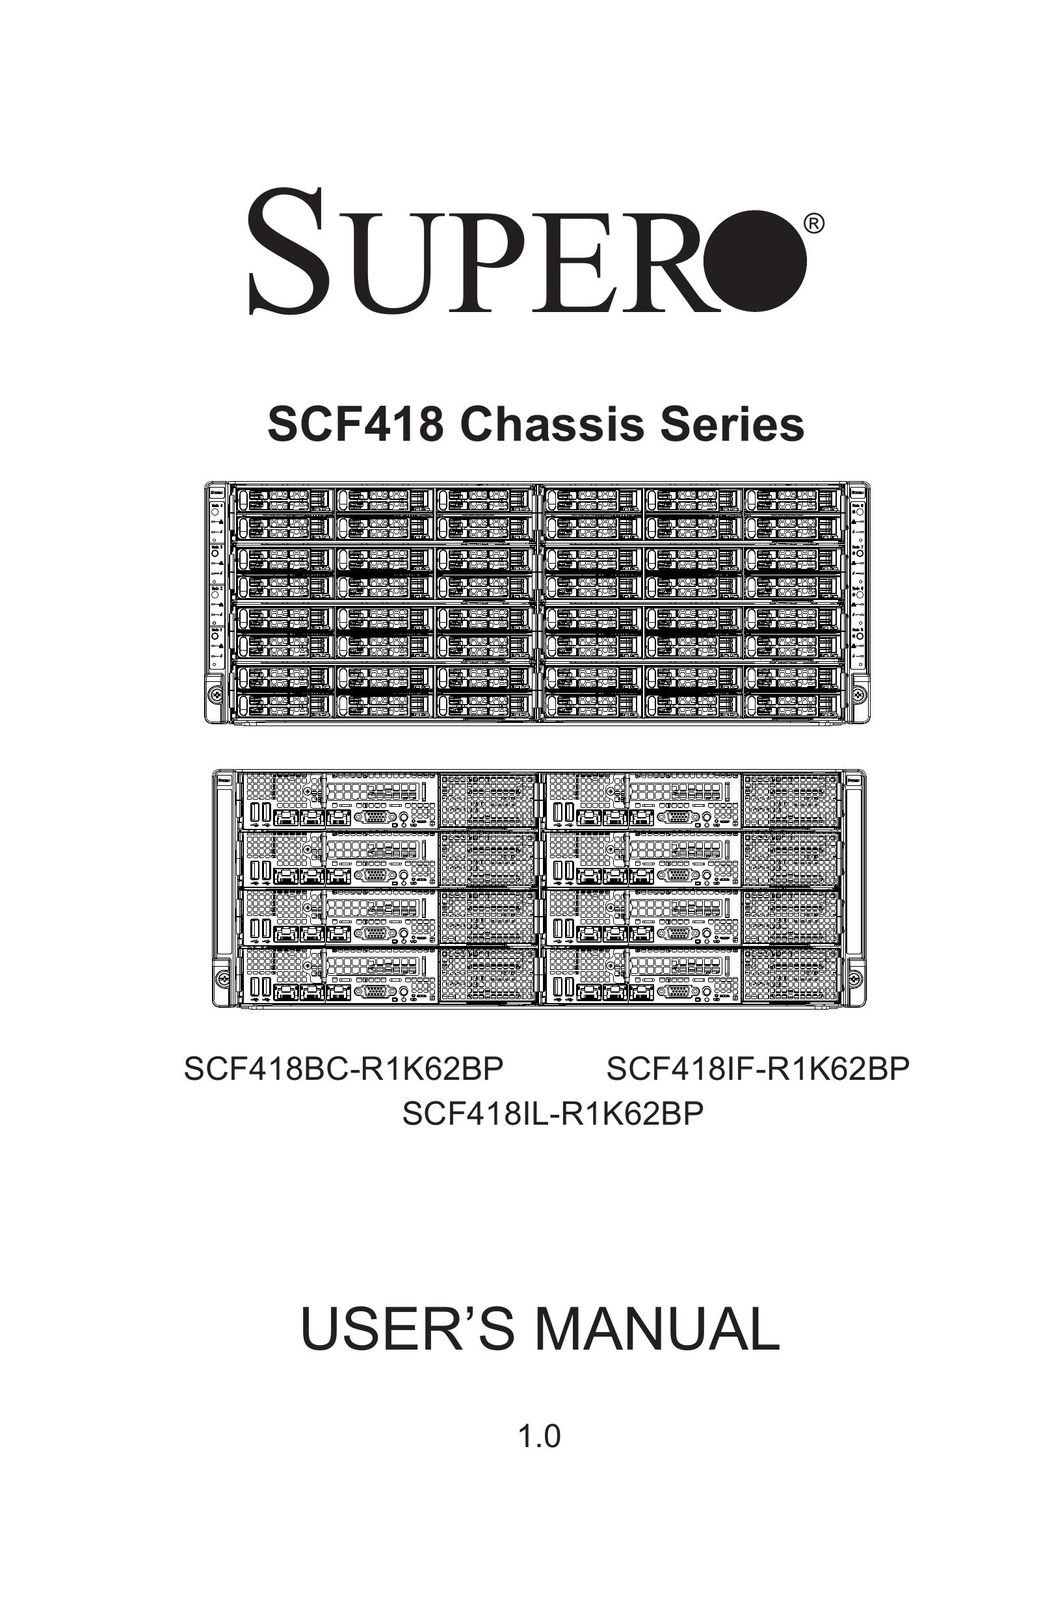 SUPER MICRO Computer SYSF617R2RT Computer Hardware User Manual